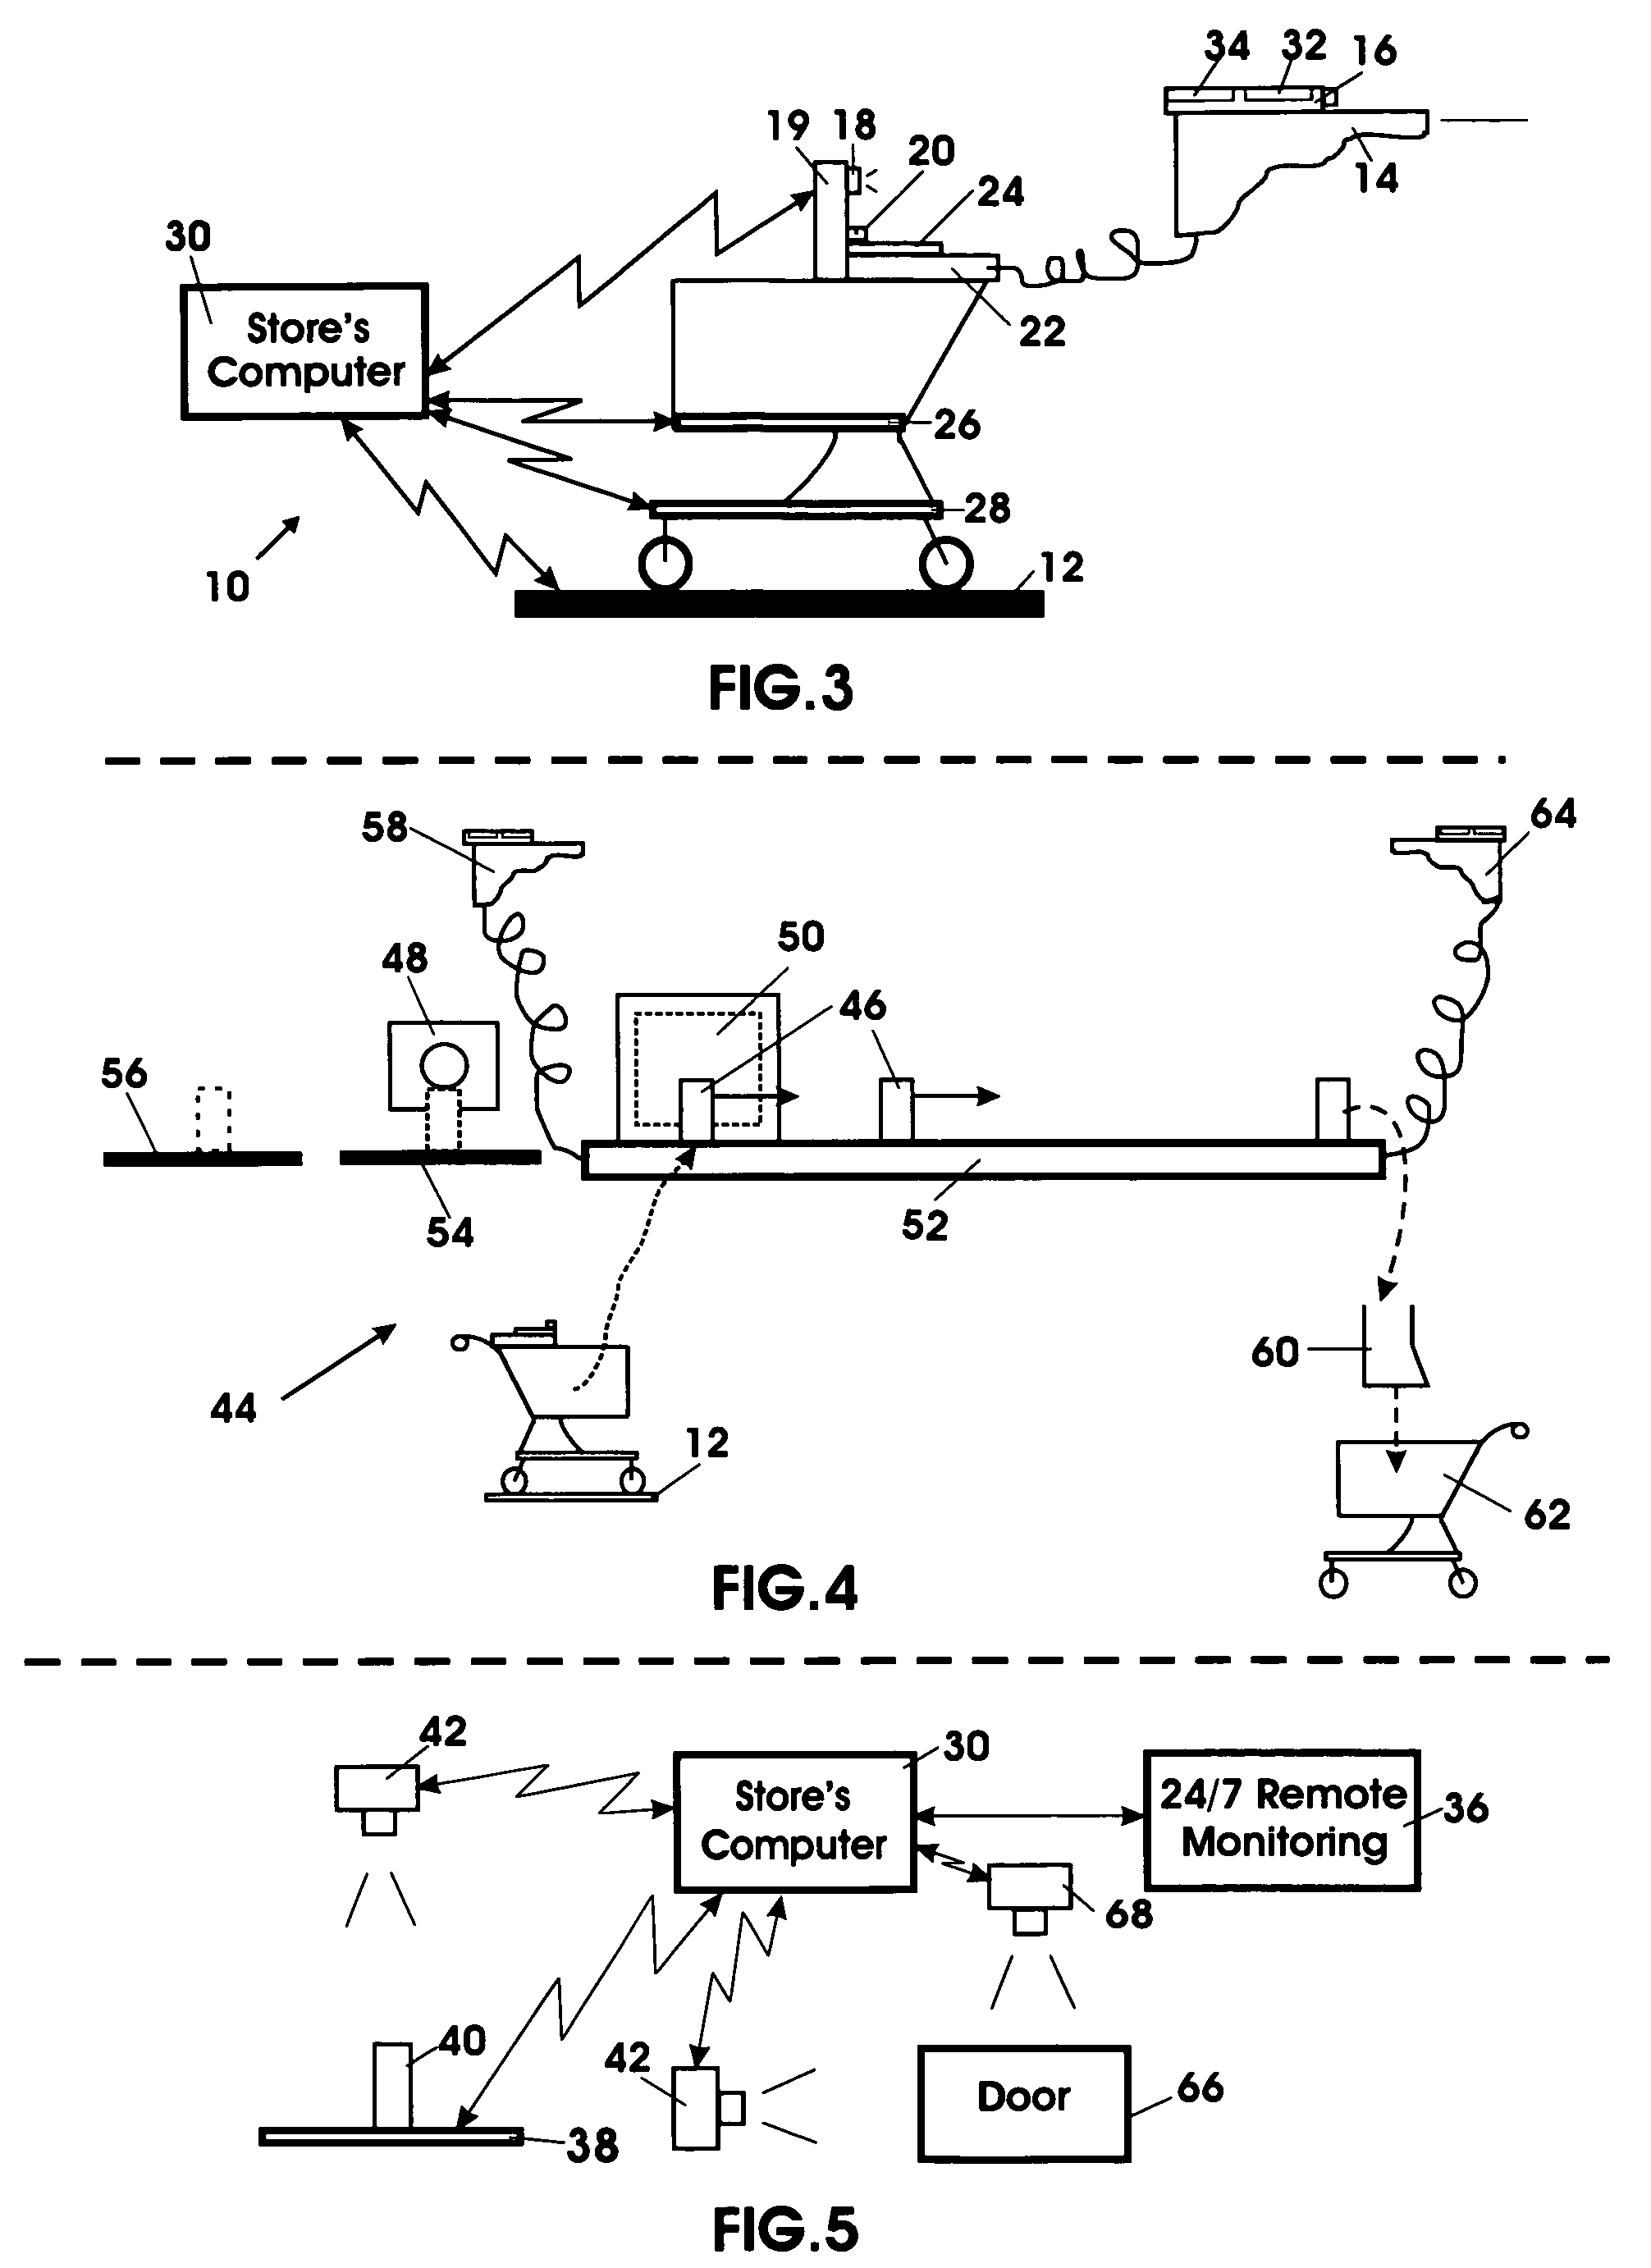 System and method for security protection, inventory tracking and automated shopping cart checkout